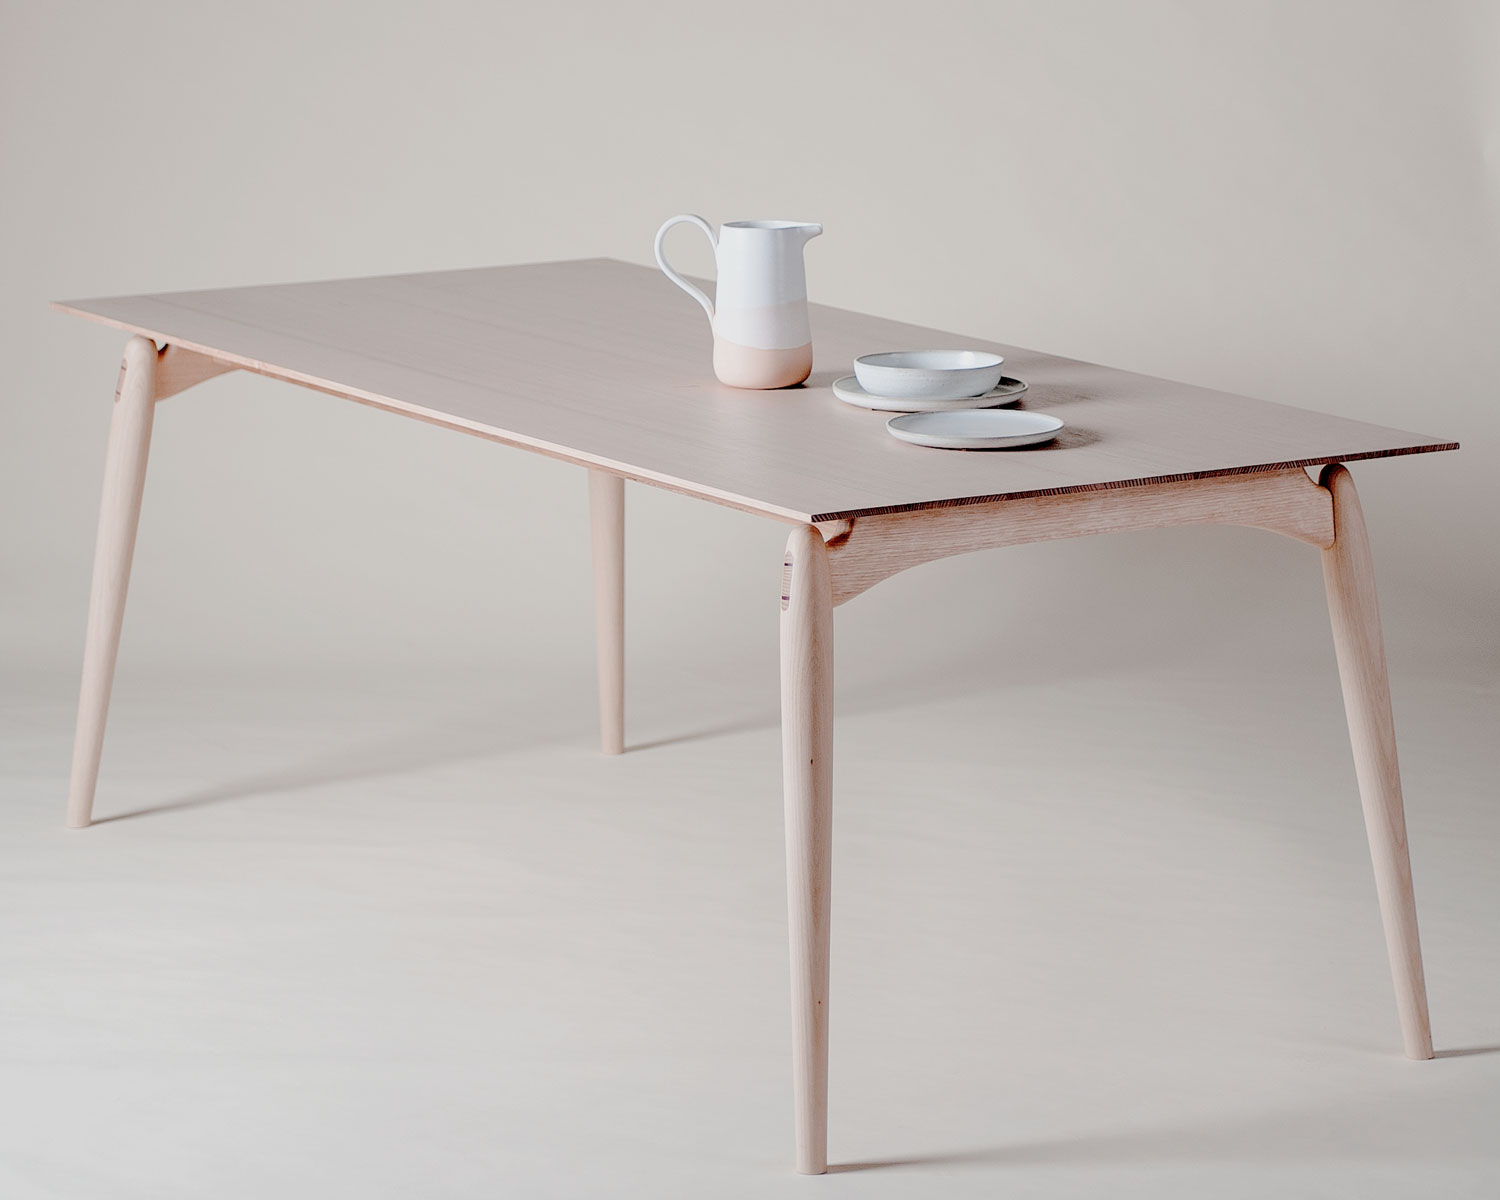 Fred-Table-by-Modern-Times-and-Adam-Markowitz-Yellowtrace-06.jpg